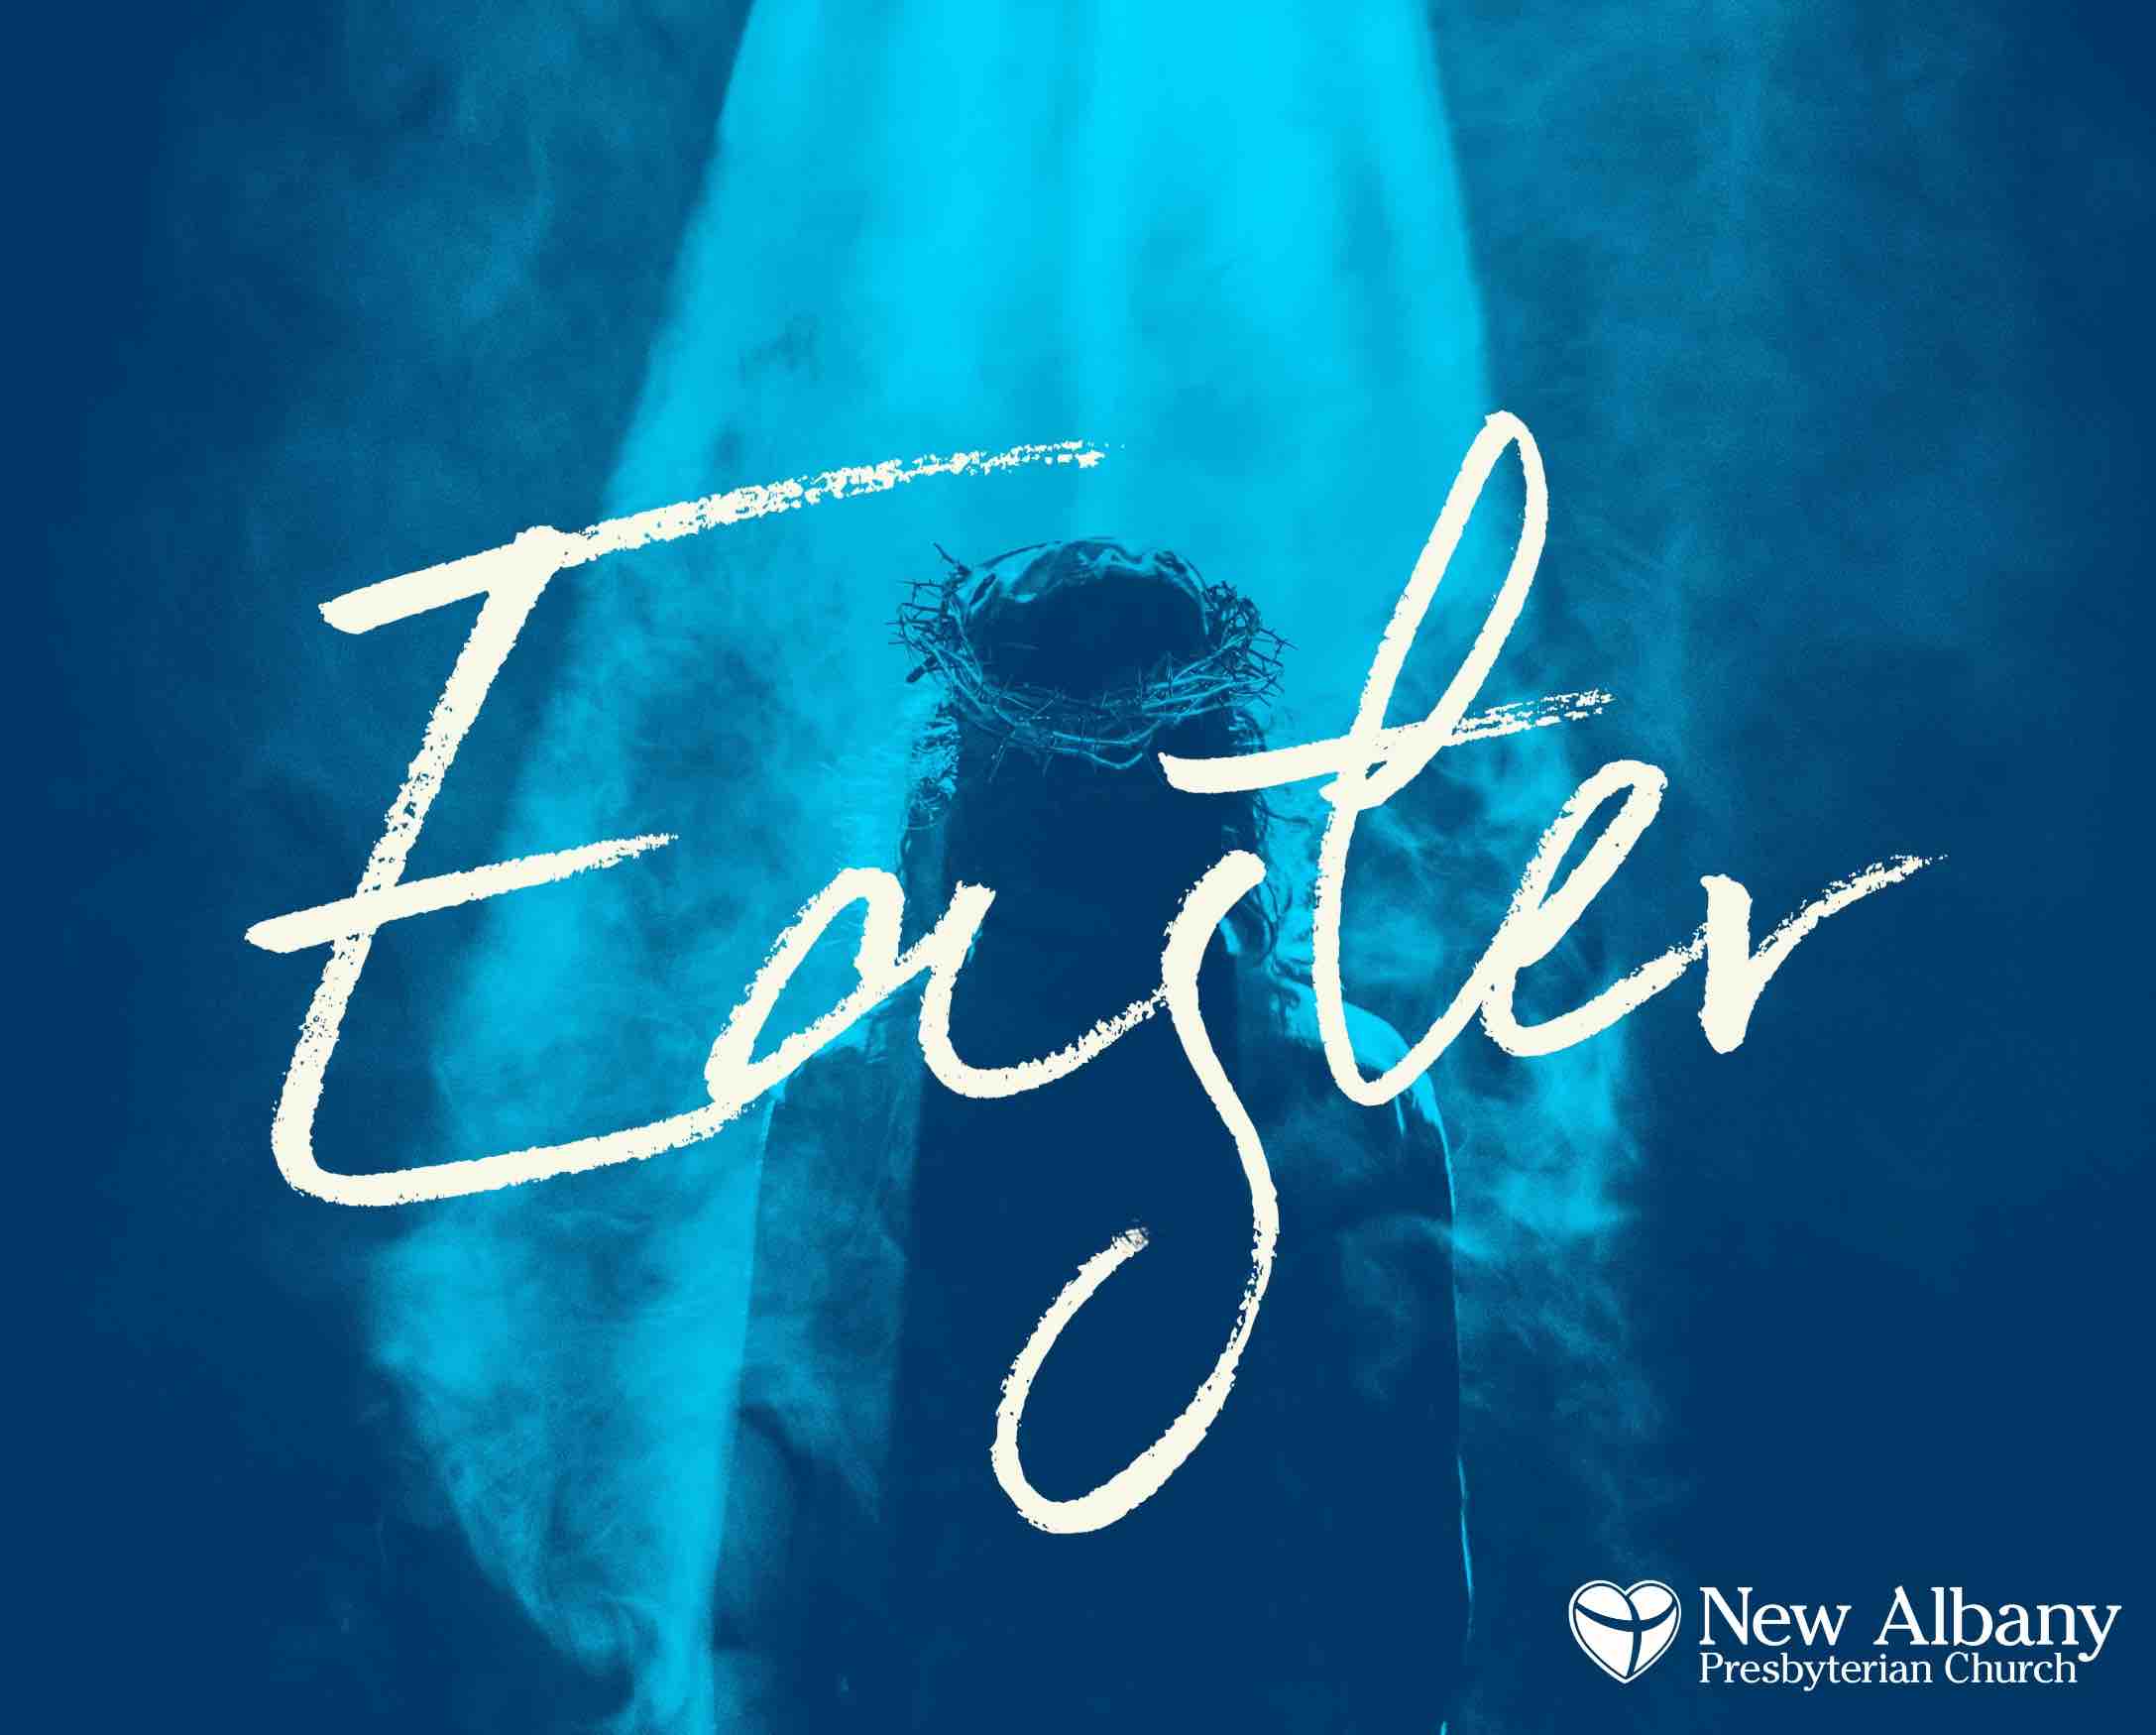 Easter Sunday: Why are You Troubled?